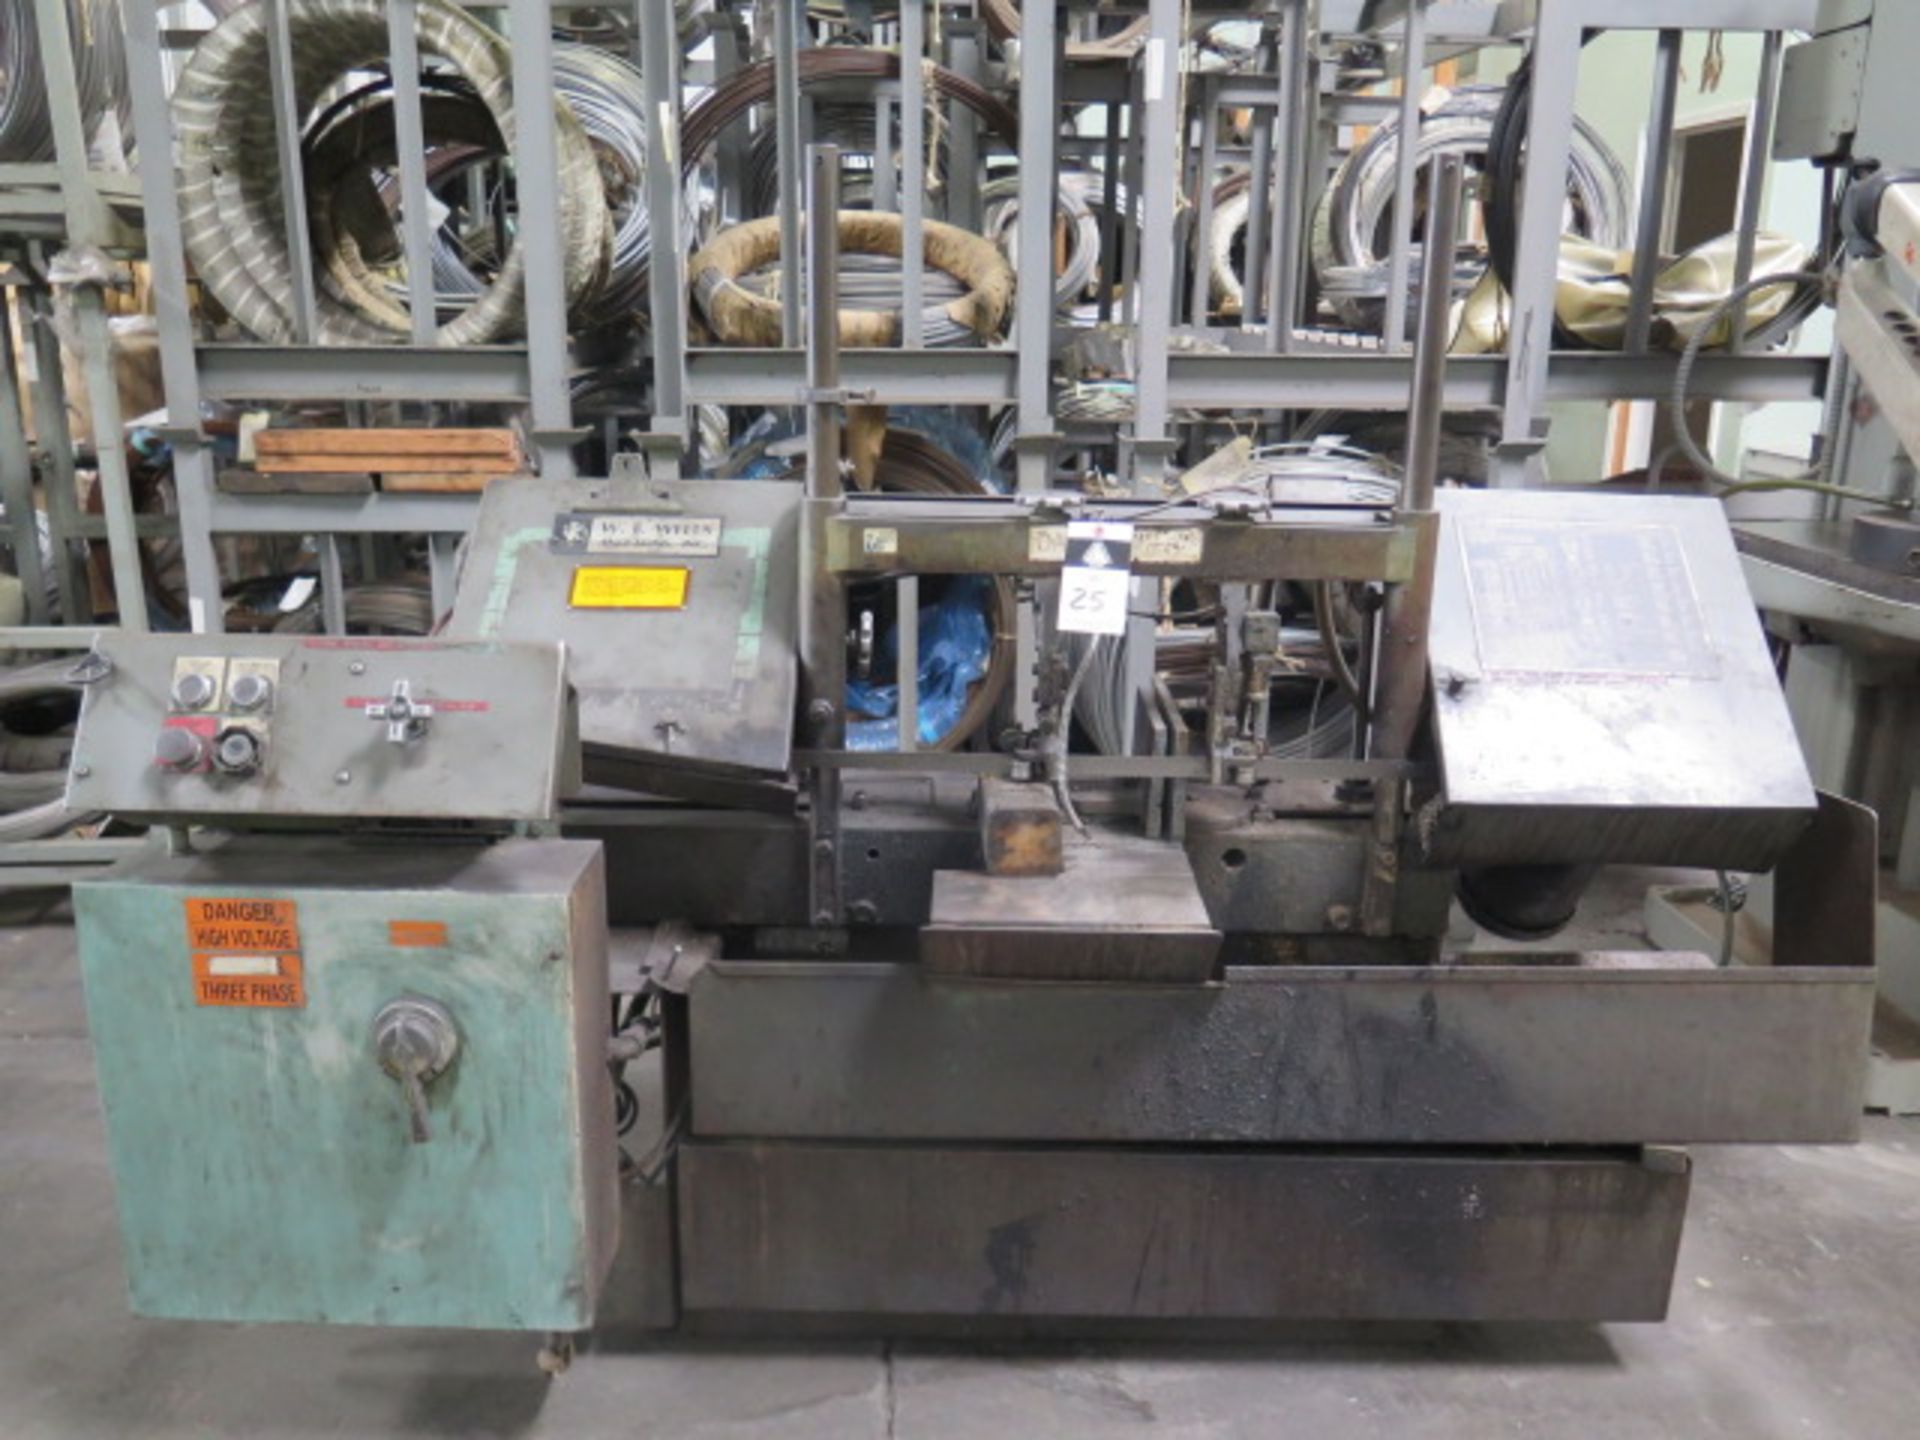 W.F. Wells W-9 9" Horizontal Band Saw s/n 924735 w/ Manual Clamping, Coolant (SOLD AS-IS - NO